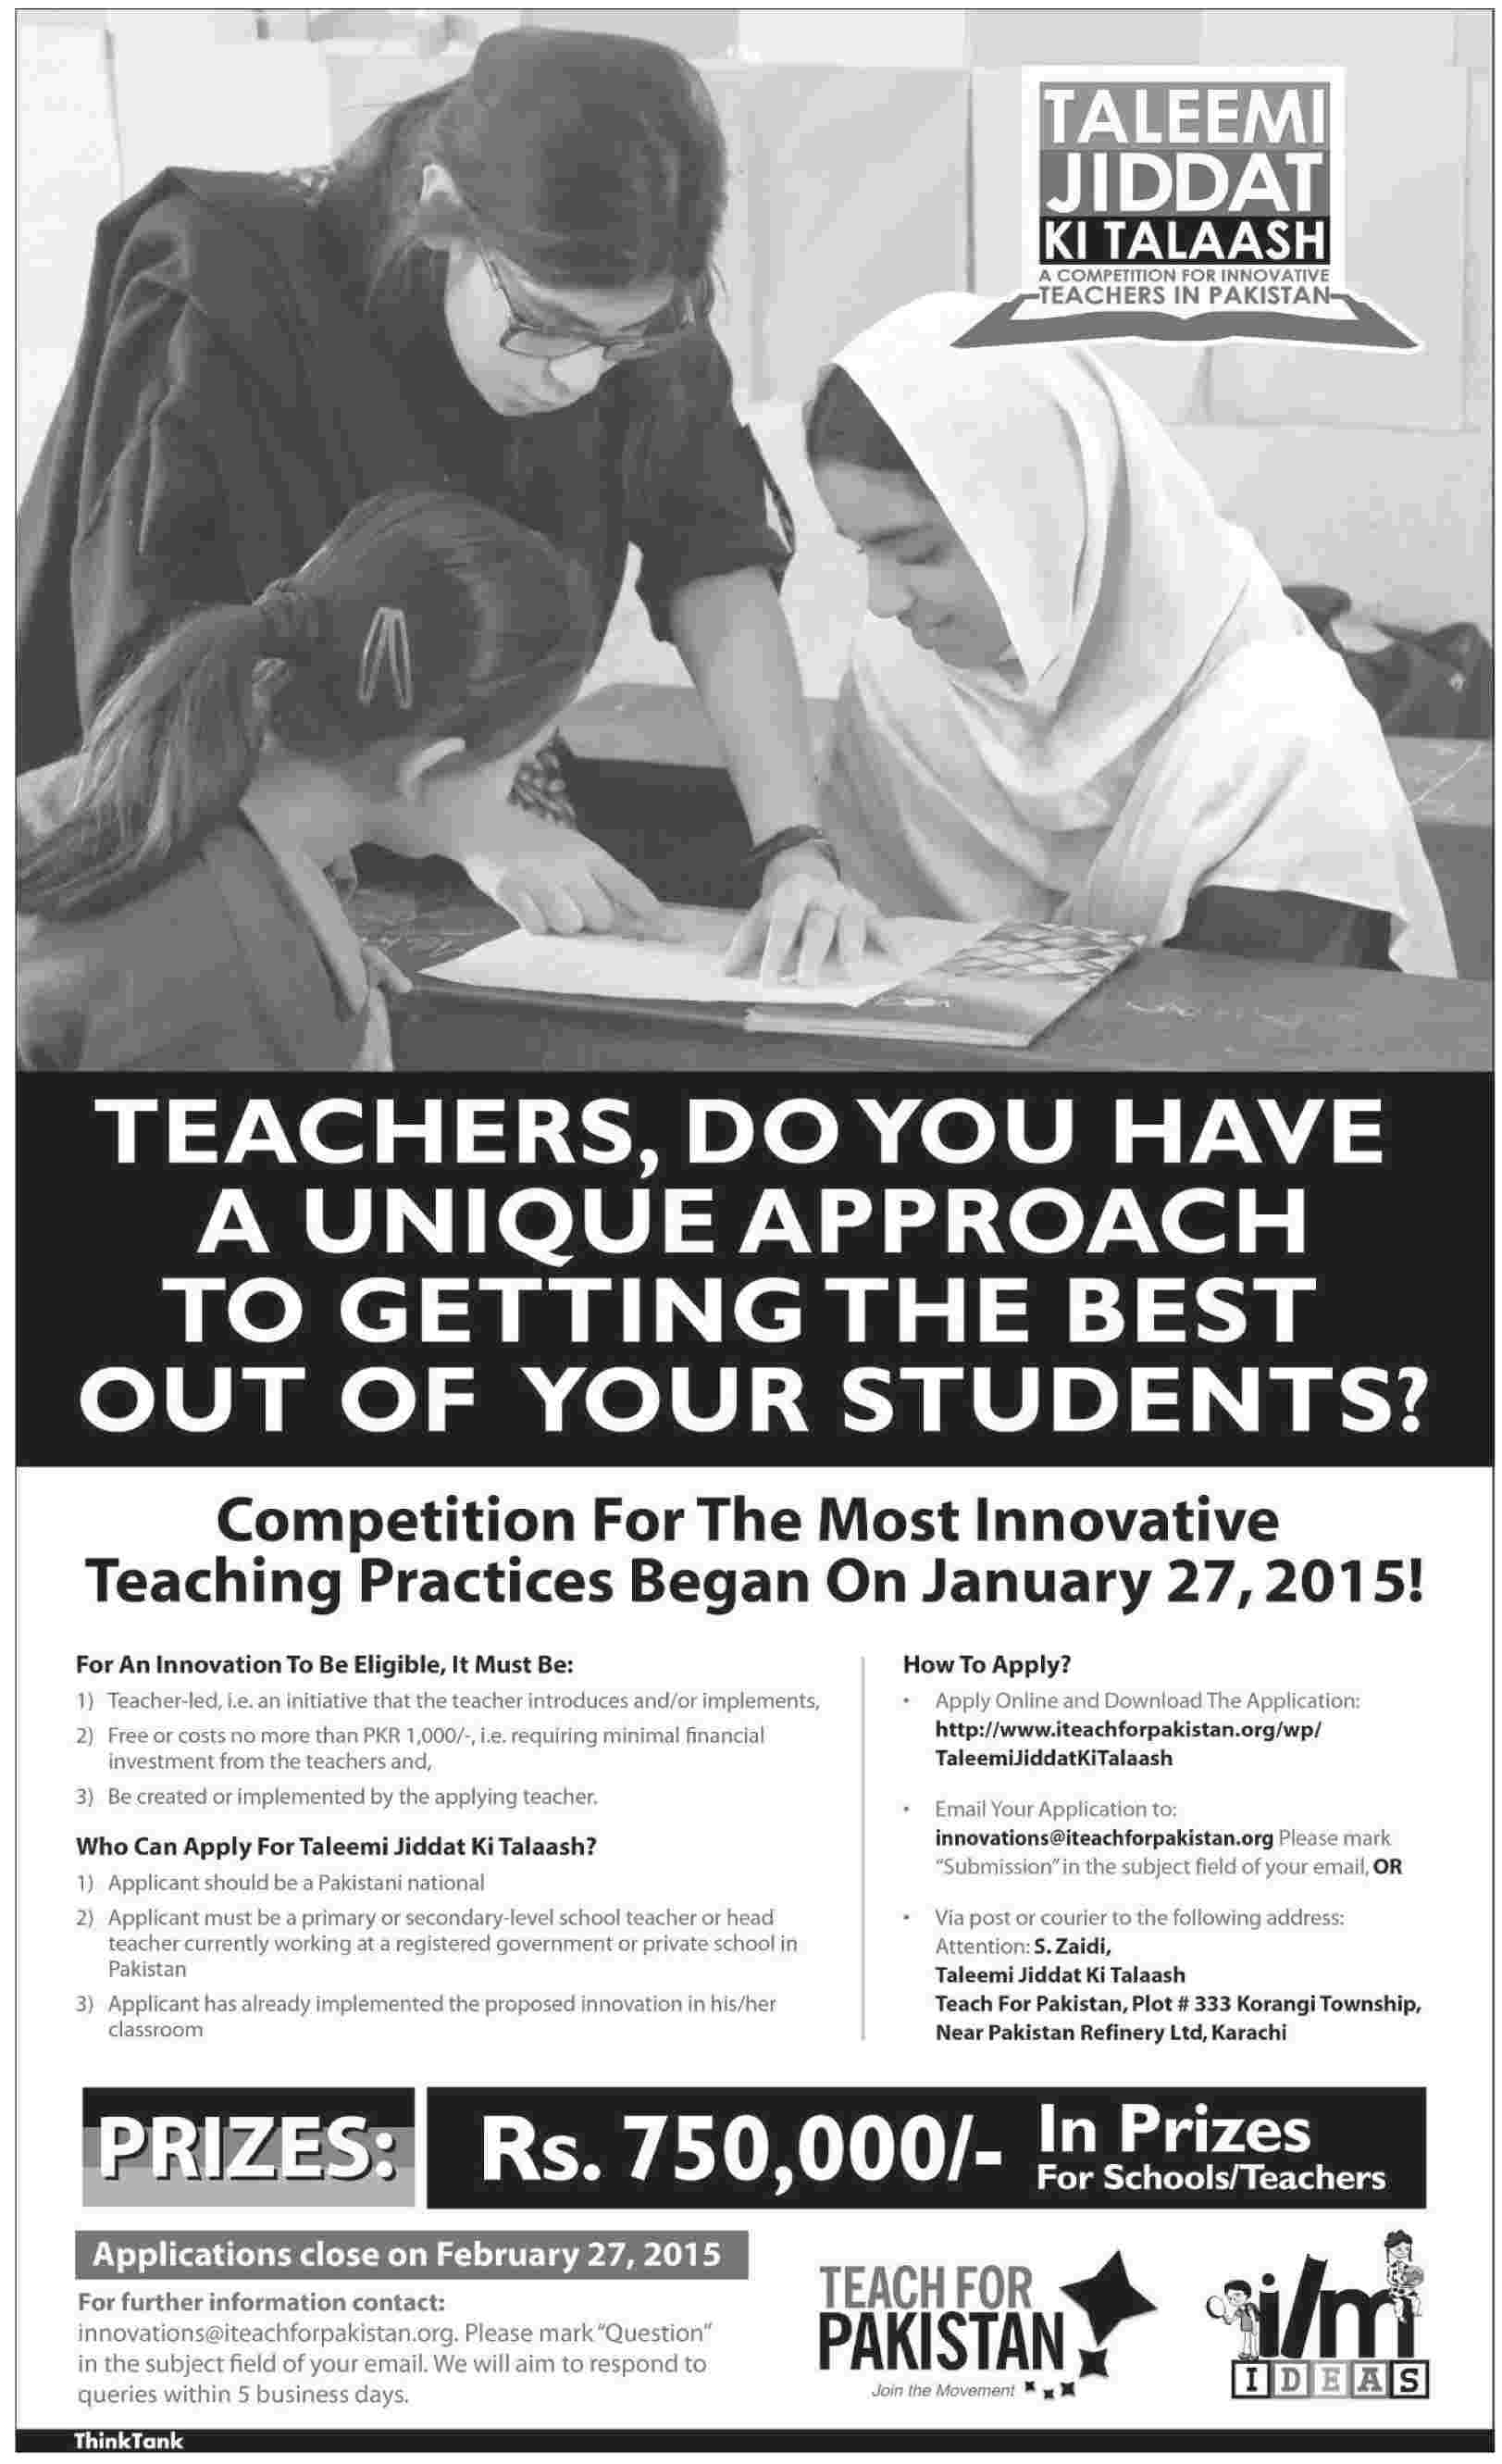 Competition for the Most Innovative Teaching Practices